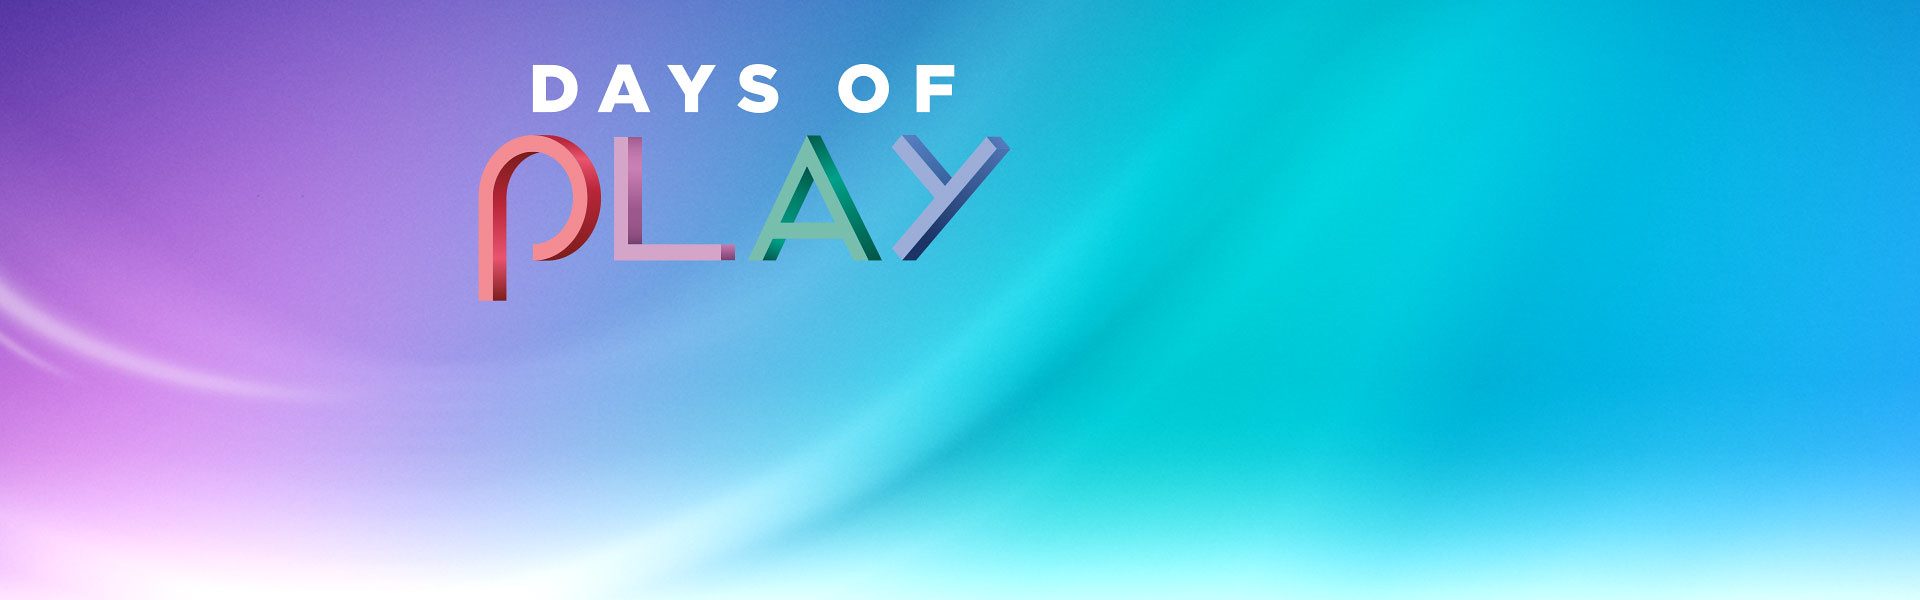 days of play playstation 2020